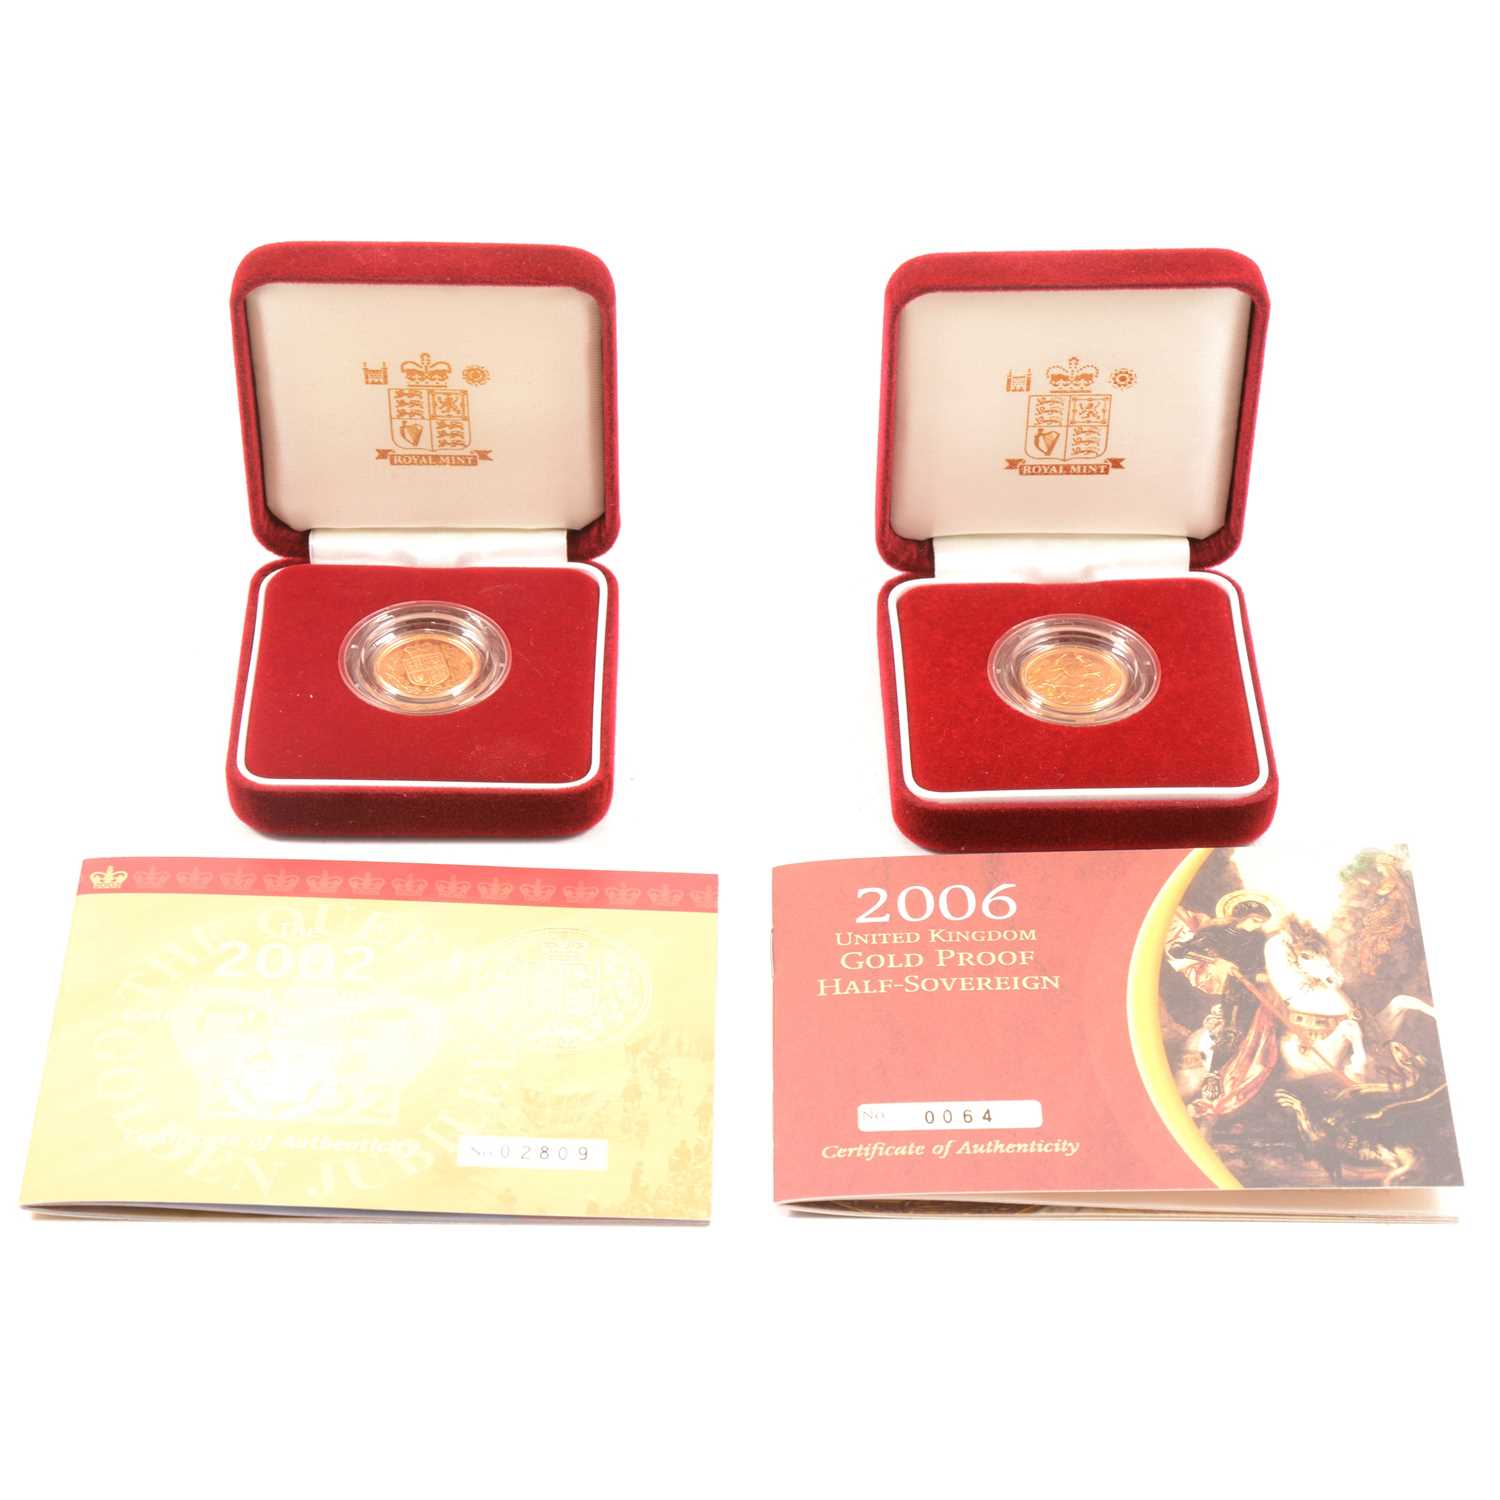 Lot 137 - Two Gold Proof Half Sovereigns  Coins, Elizabeth II 2002 and 2006.